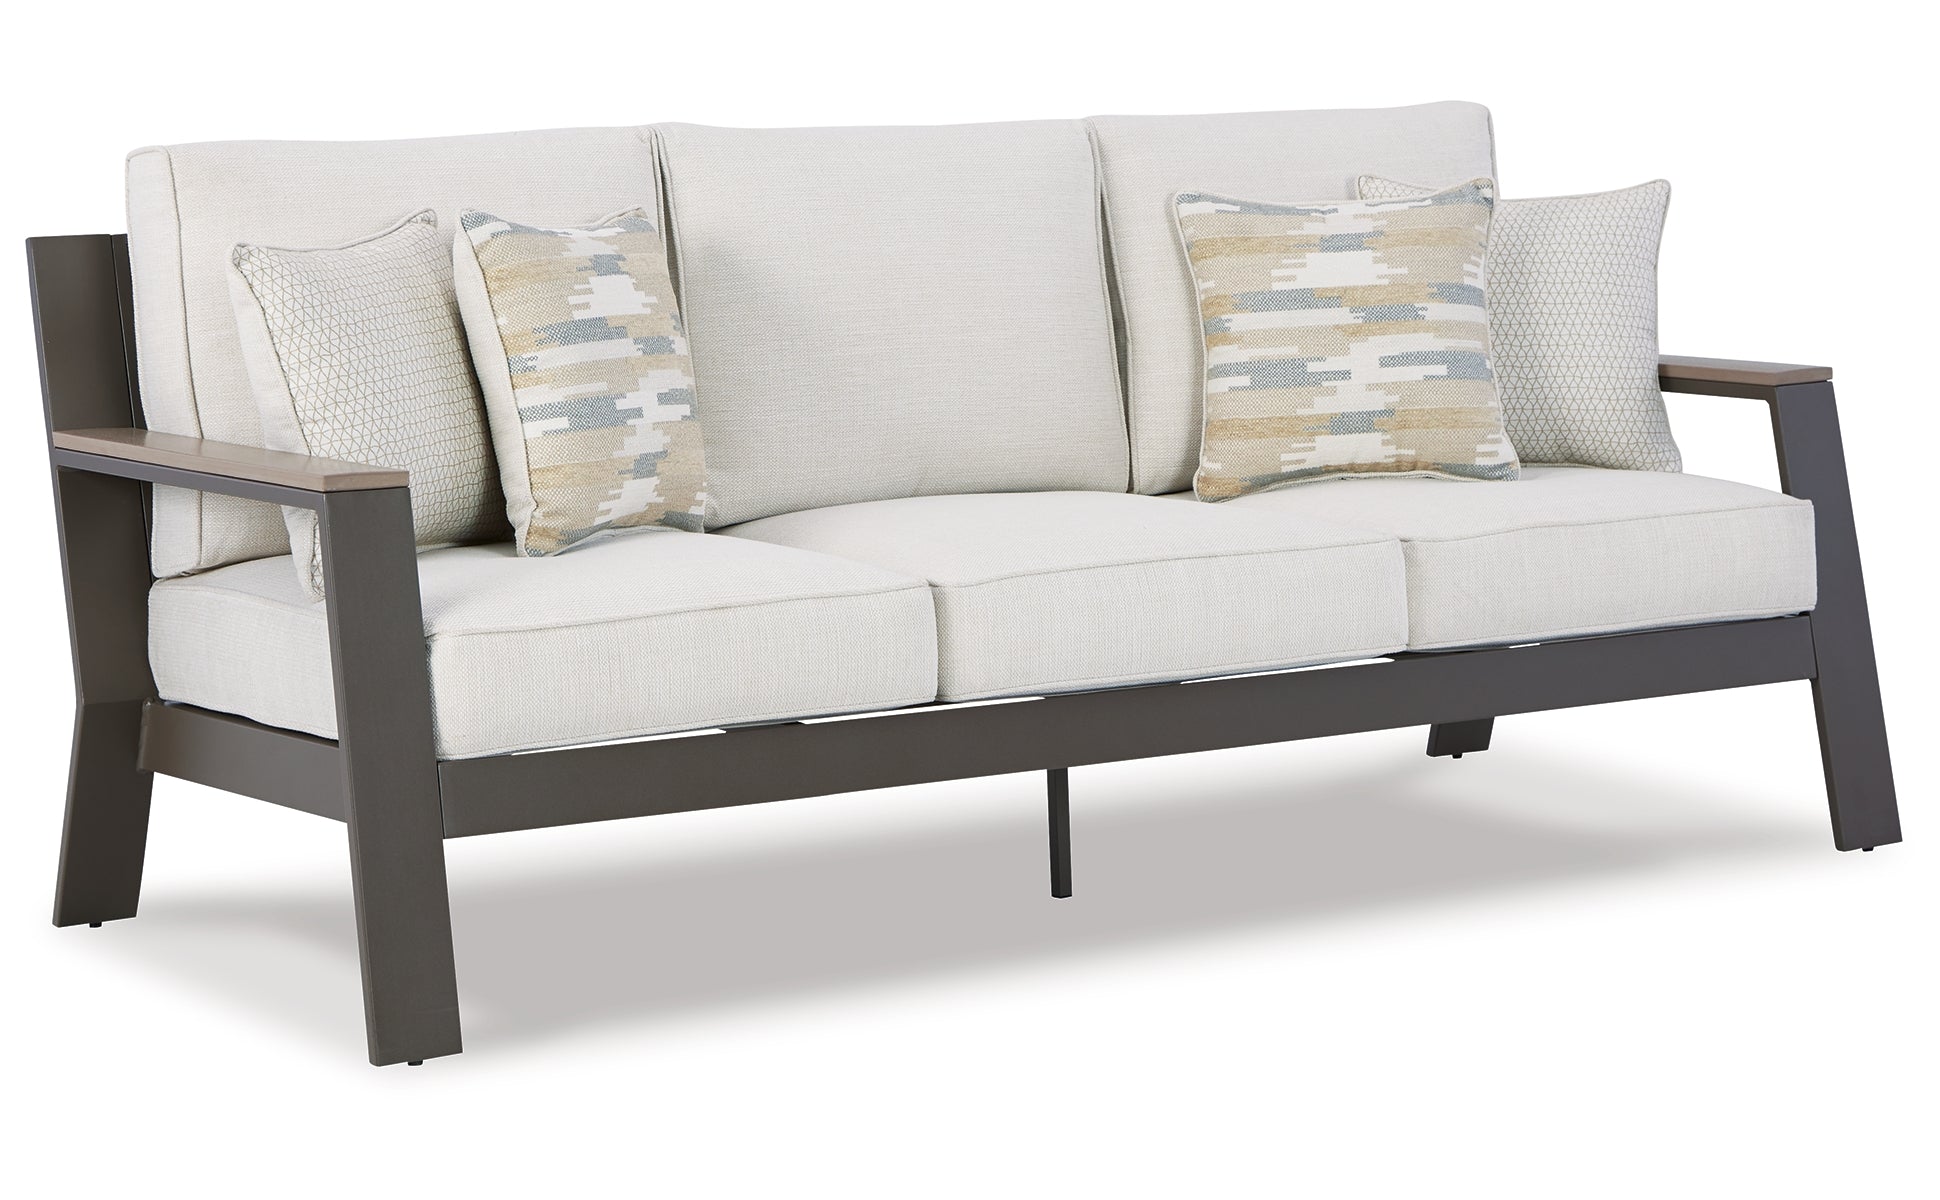 Tropicava Outdoor Sofa with Coffee Table